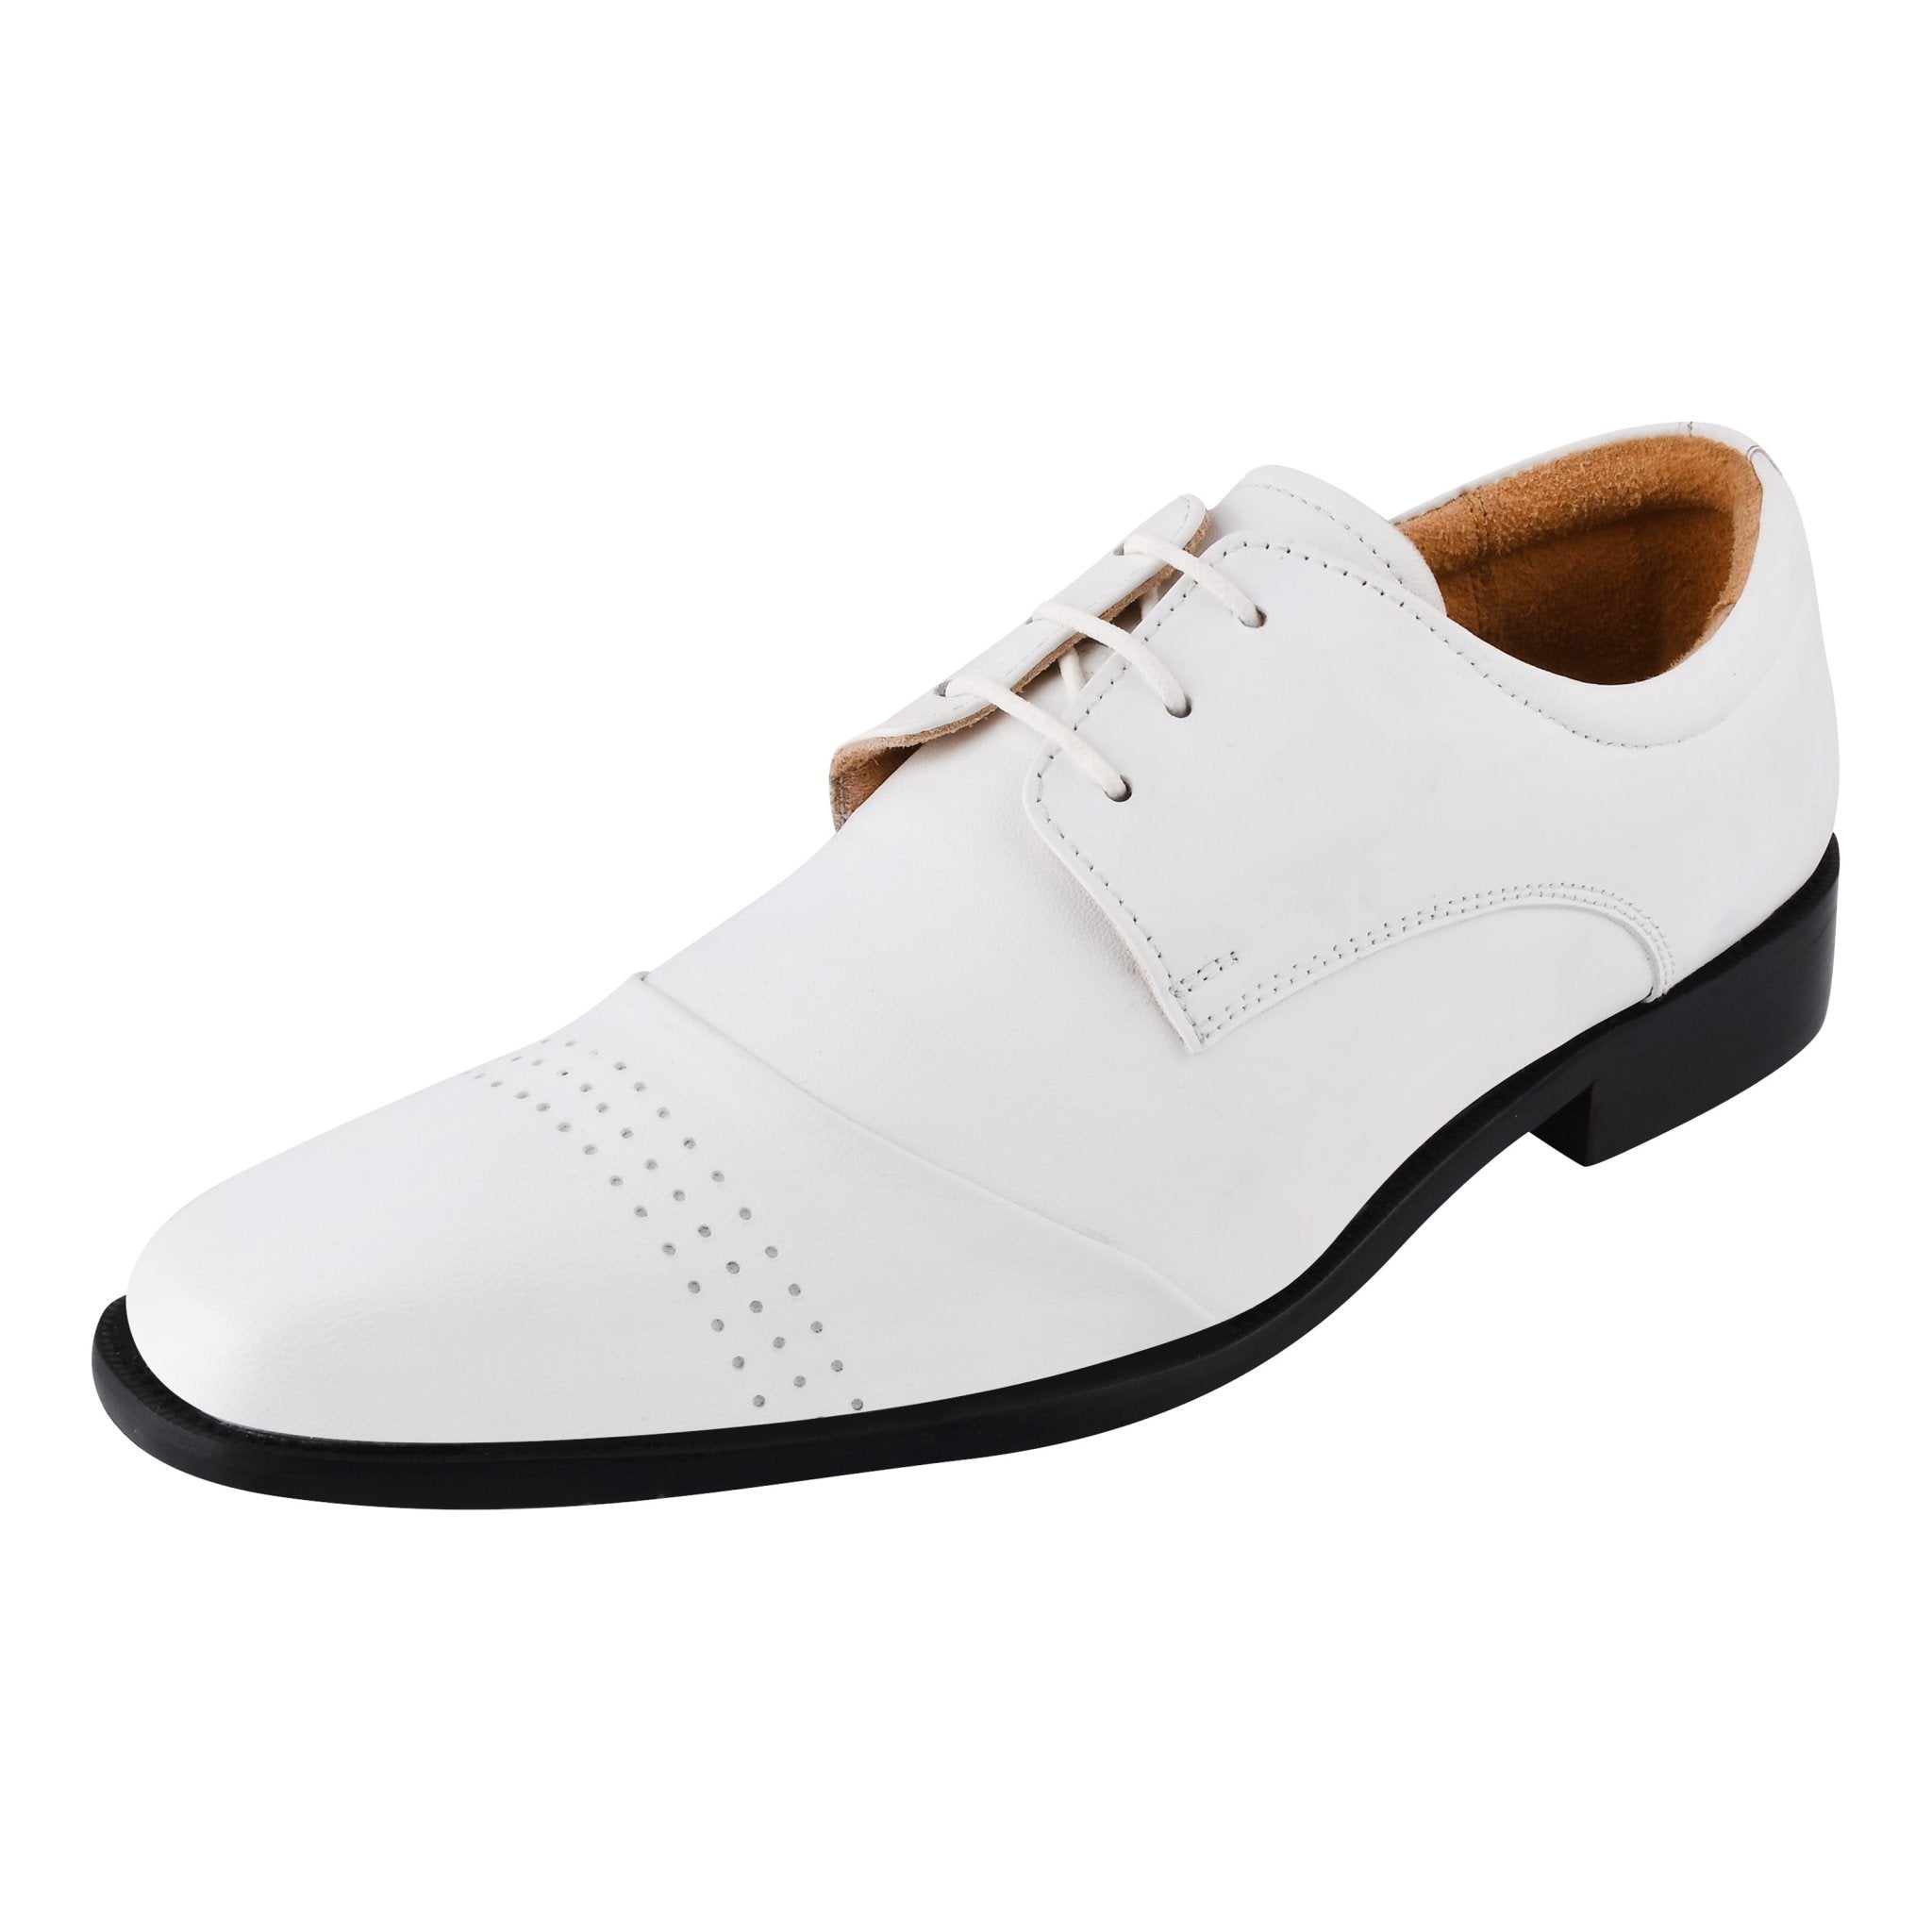 Zapato Leather Oxford Style Dress Shoes